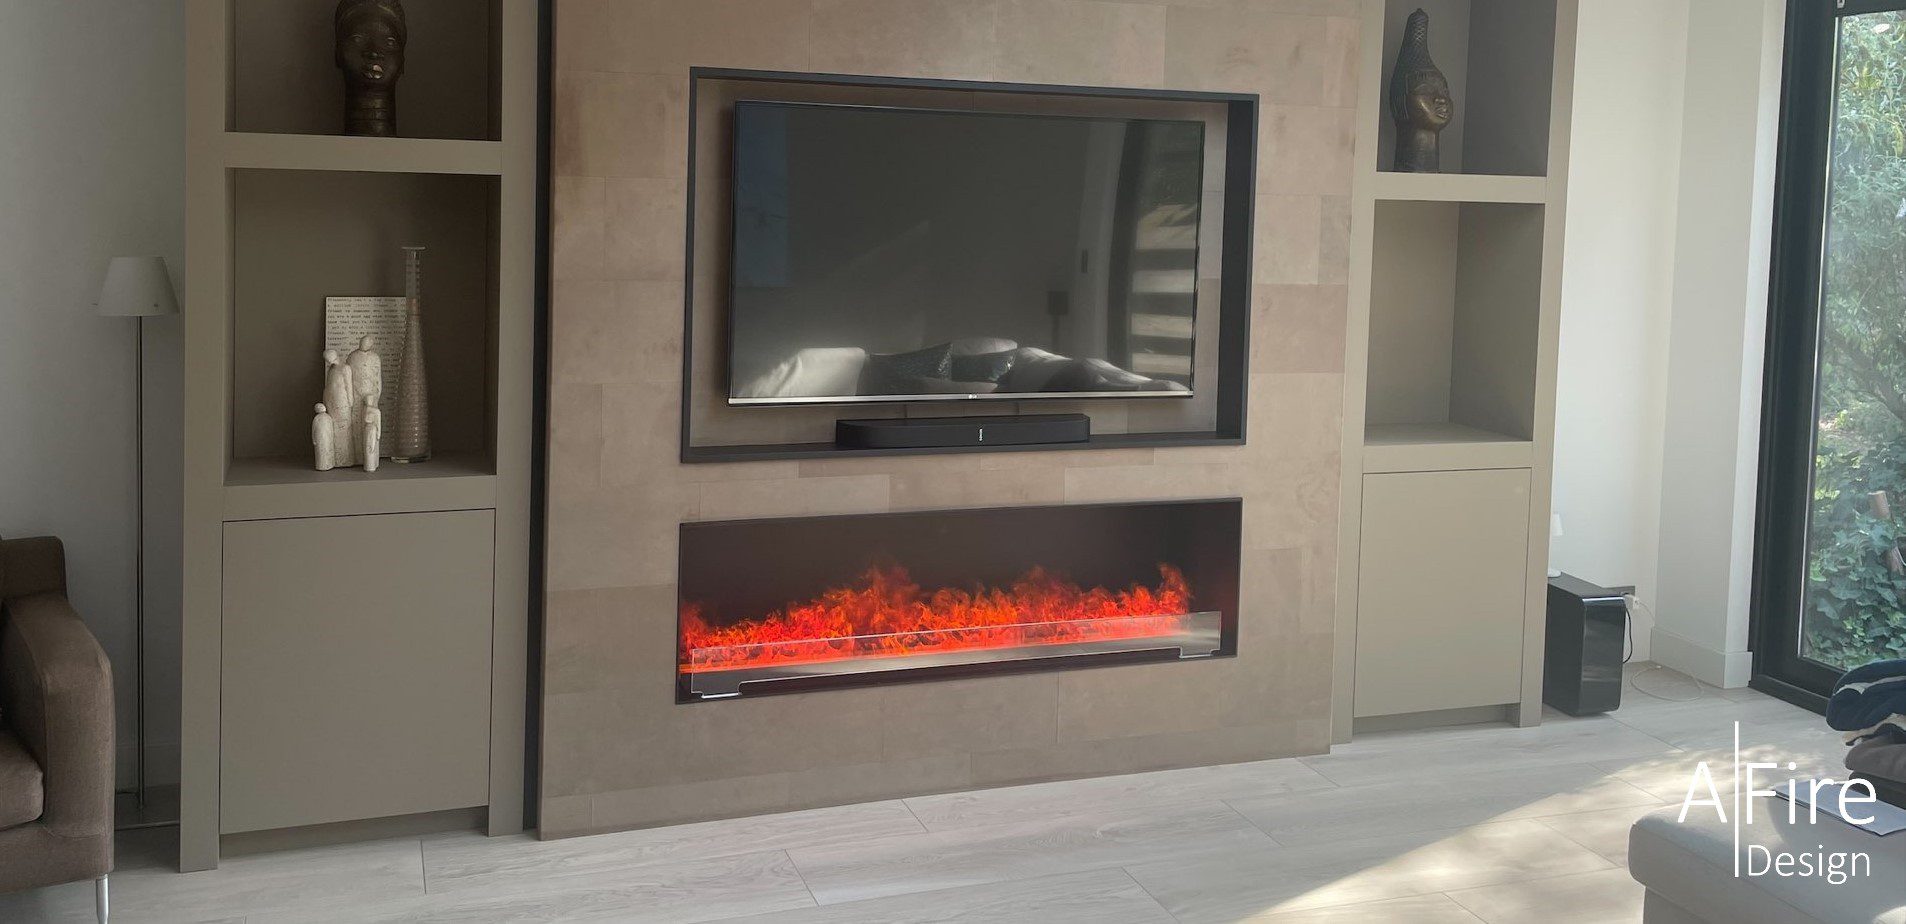 Role of a fireplace in interior design 